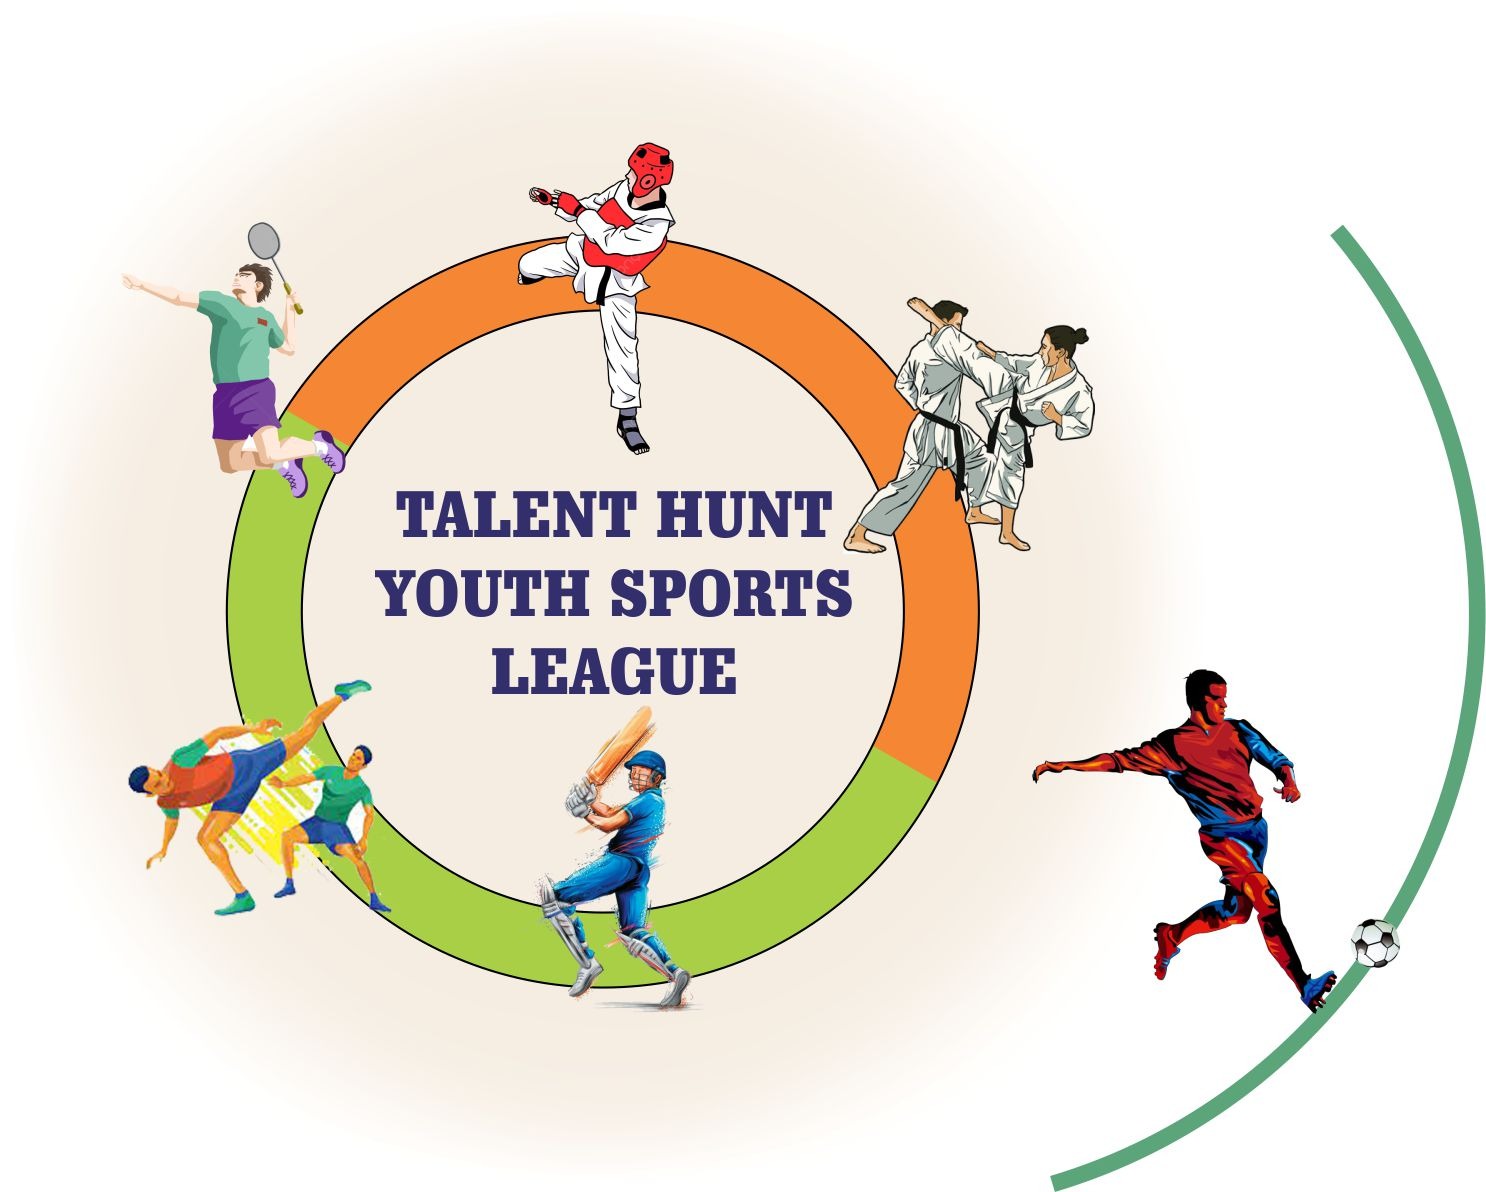 TALENT HUNT YOUTH SPORTS LEAGUE 